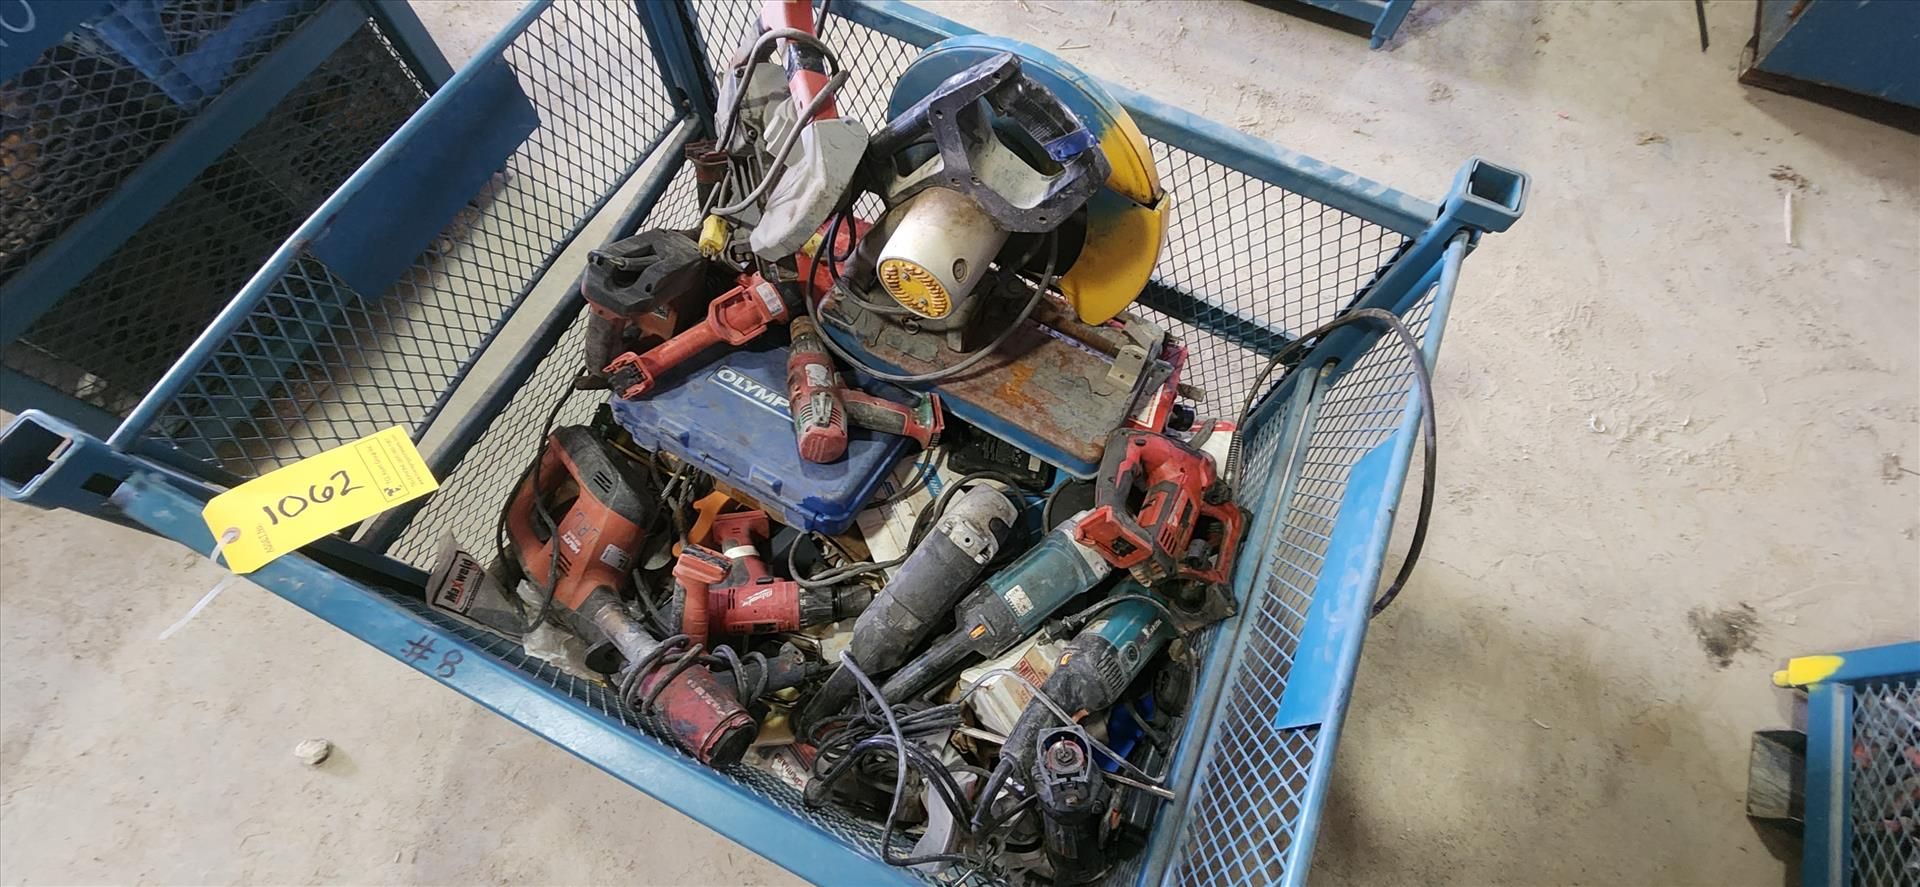 misc. electric saws, angle grinders, drills, hand tools, etc. c/w tote {Day 2} [TAG 1062 / LOC